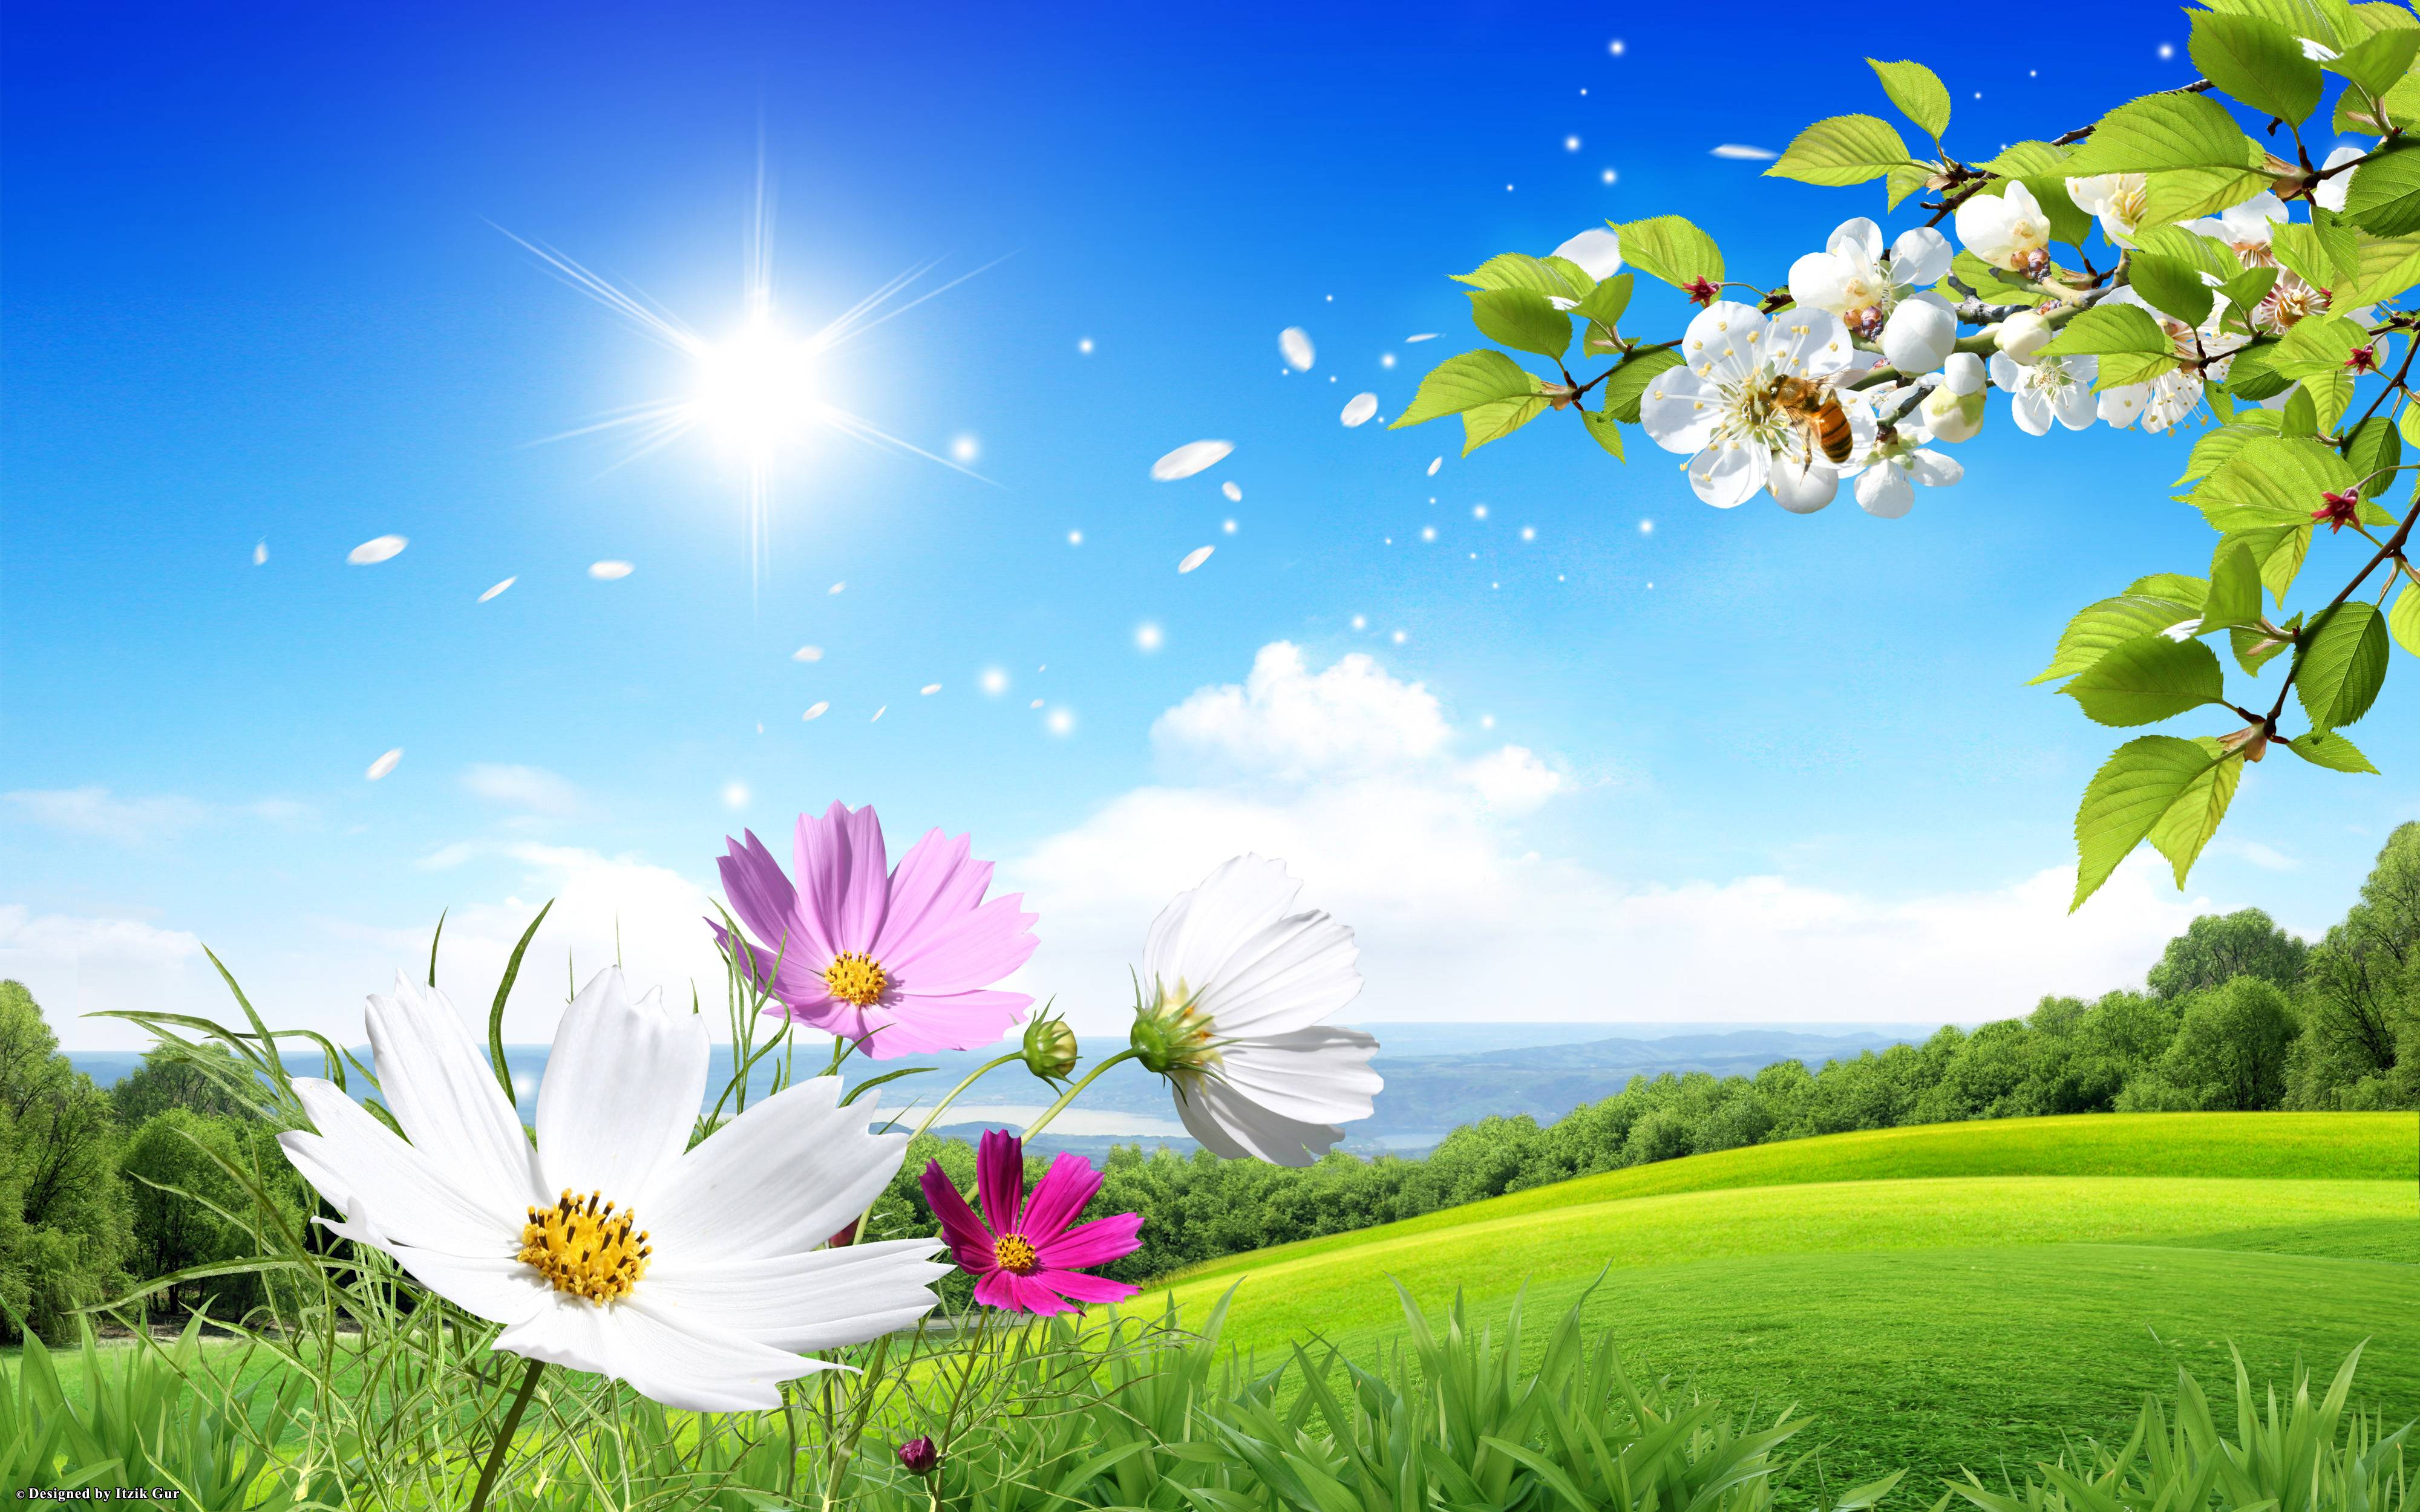 Spring Nature Image Spring Scene Flowers Green Field Nature